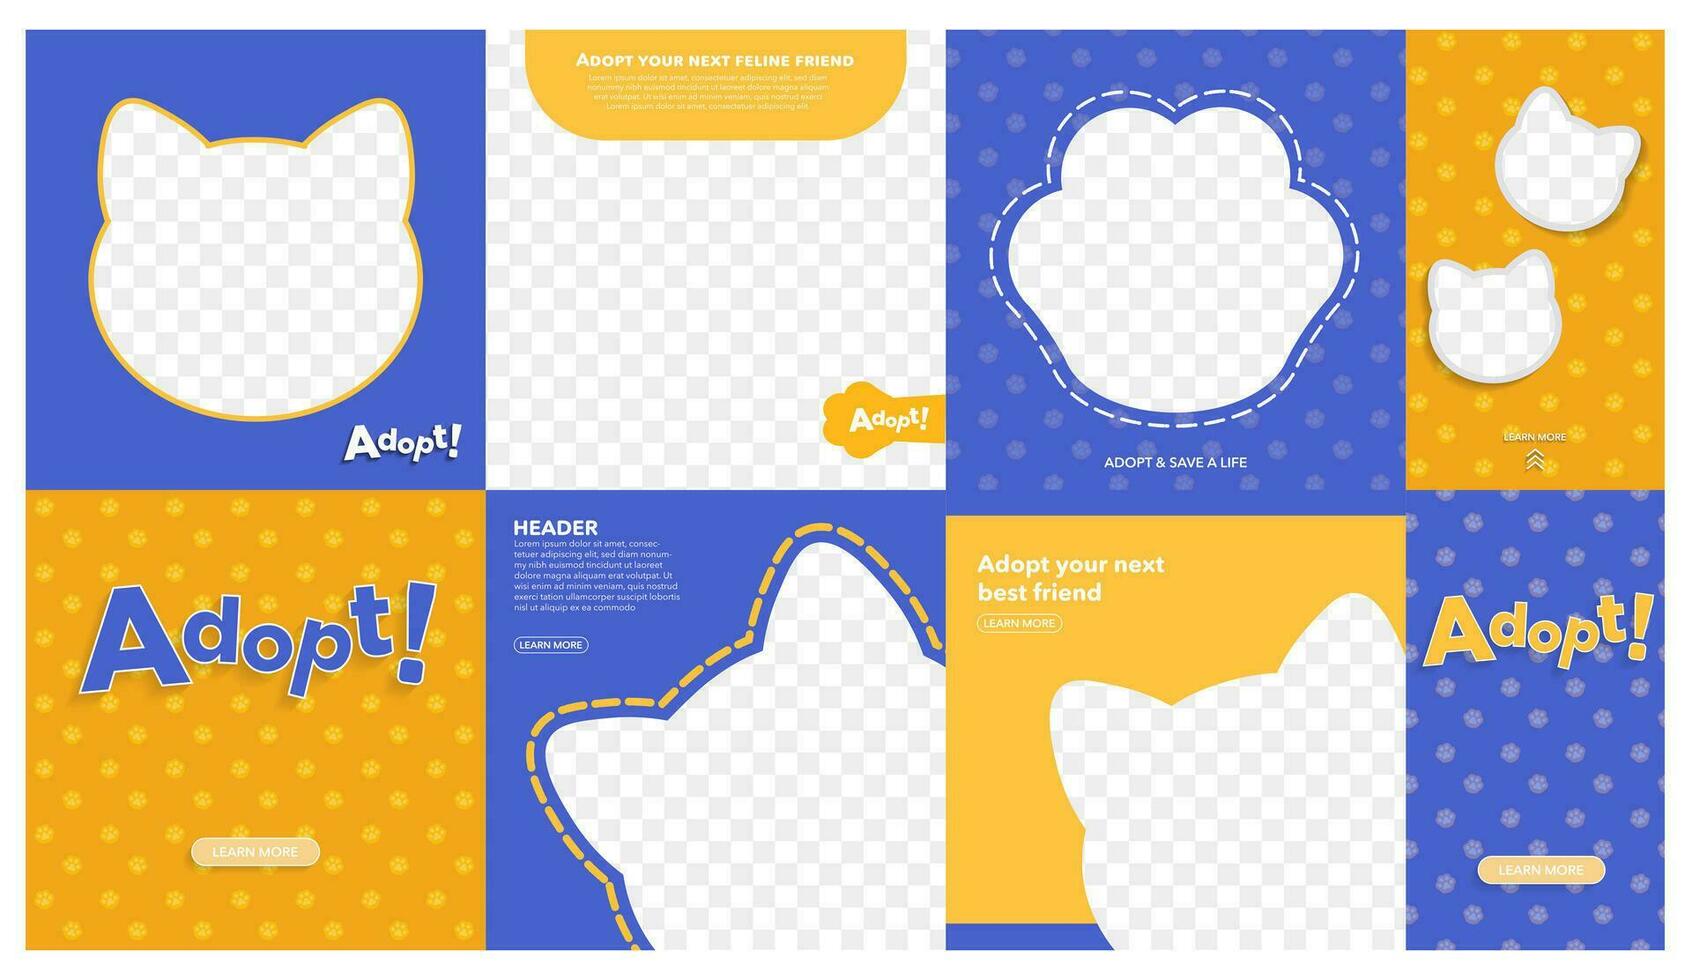 Set of Cute and colorful adoption-themed cards and templates. Orange and blue with paw patterned backgrounds. Cute cat and dog frame templates. Adopt and save a life. Editable Vector Illustration.